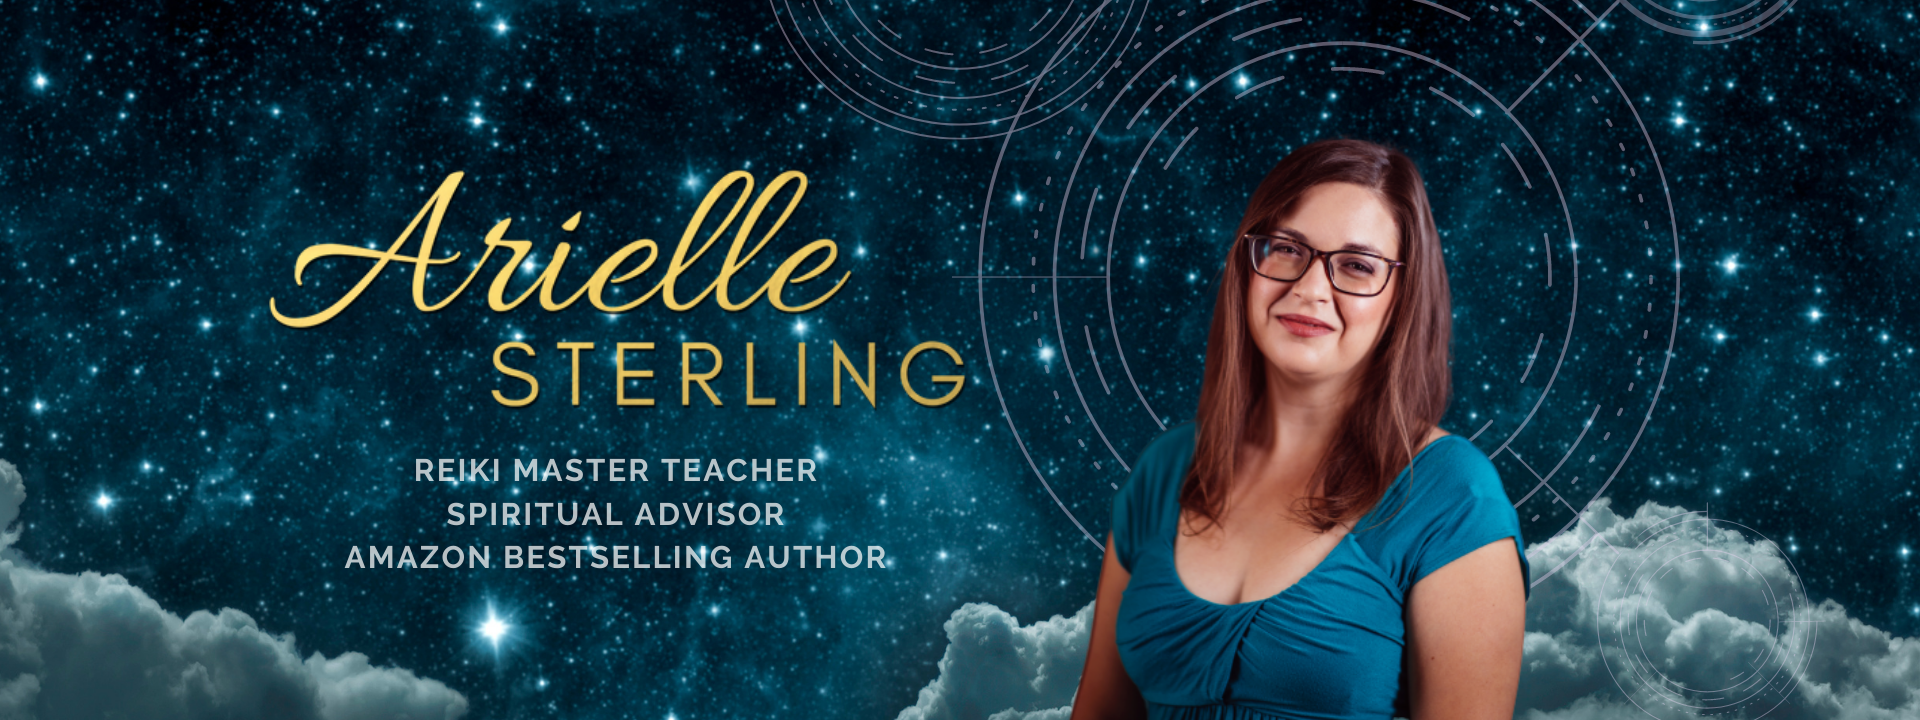 The background of this banner is a teal-tinted star and cloud background. Over layed is an image of Arielle Sterling, a young woman wearing glasses and smiling brightly. She wears a teal dress. To the left of her image, her logo 